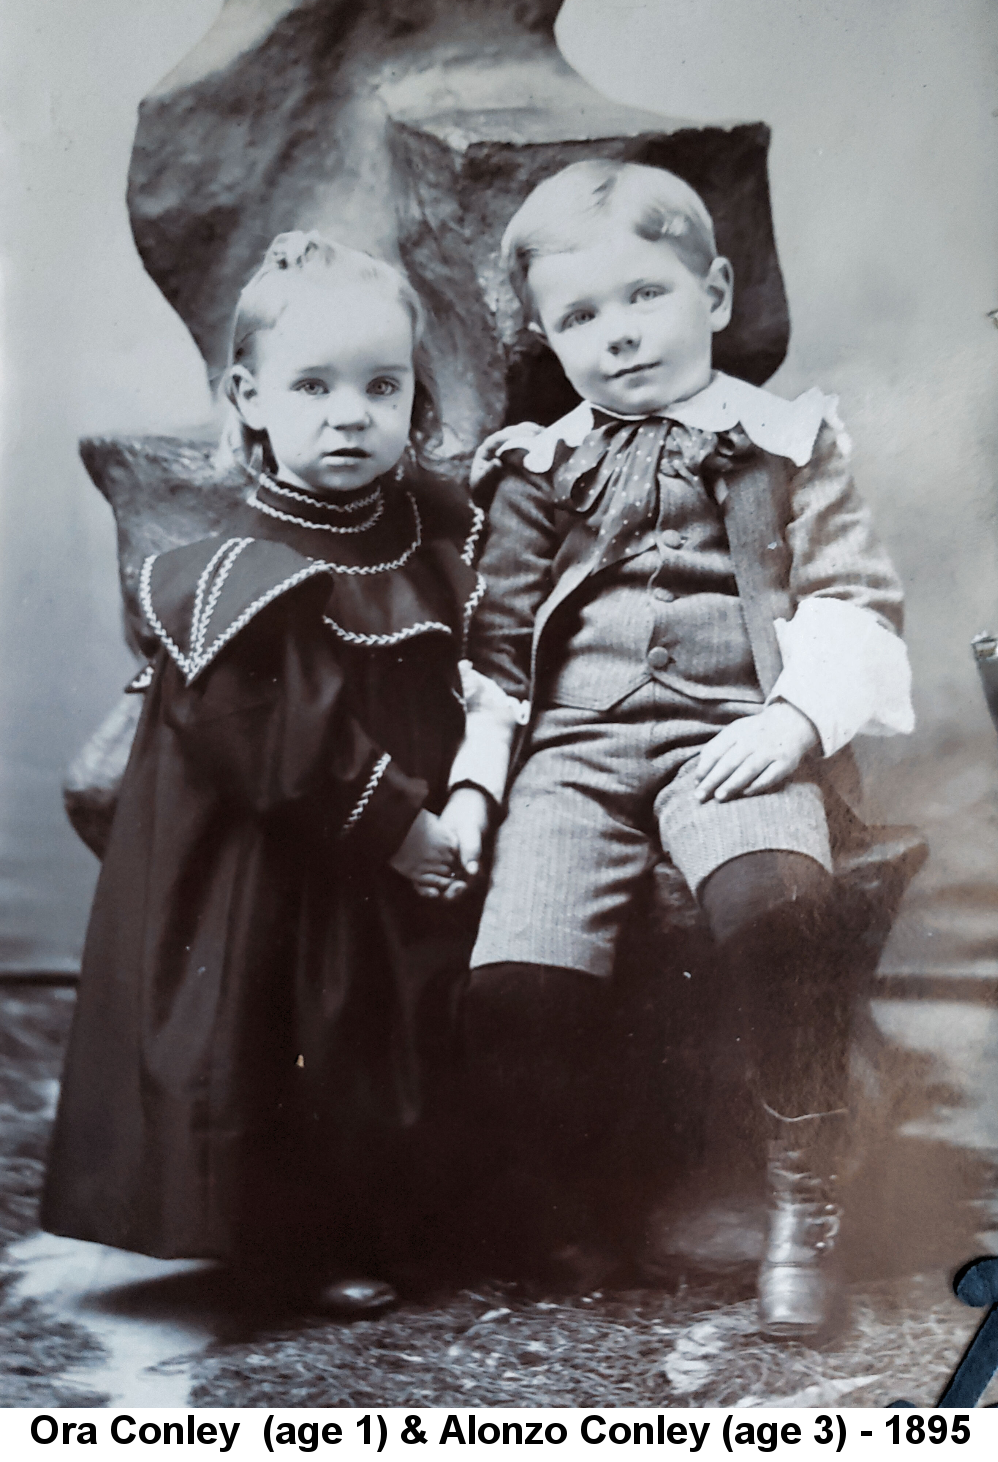 IMAGE/PHOTO: Ora Conley (age 1) & Alonzo Conley (age 3) - 1895: Black and white studio photo of two small children; on the left a little girl with blonde hair stands in front of a large rock on a ledge of which sits a little boy, also with blond hair, and they are holding hands.